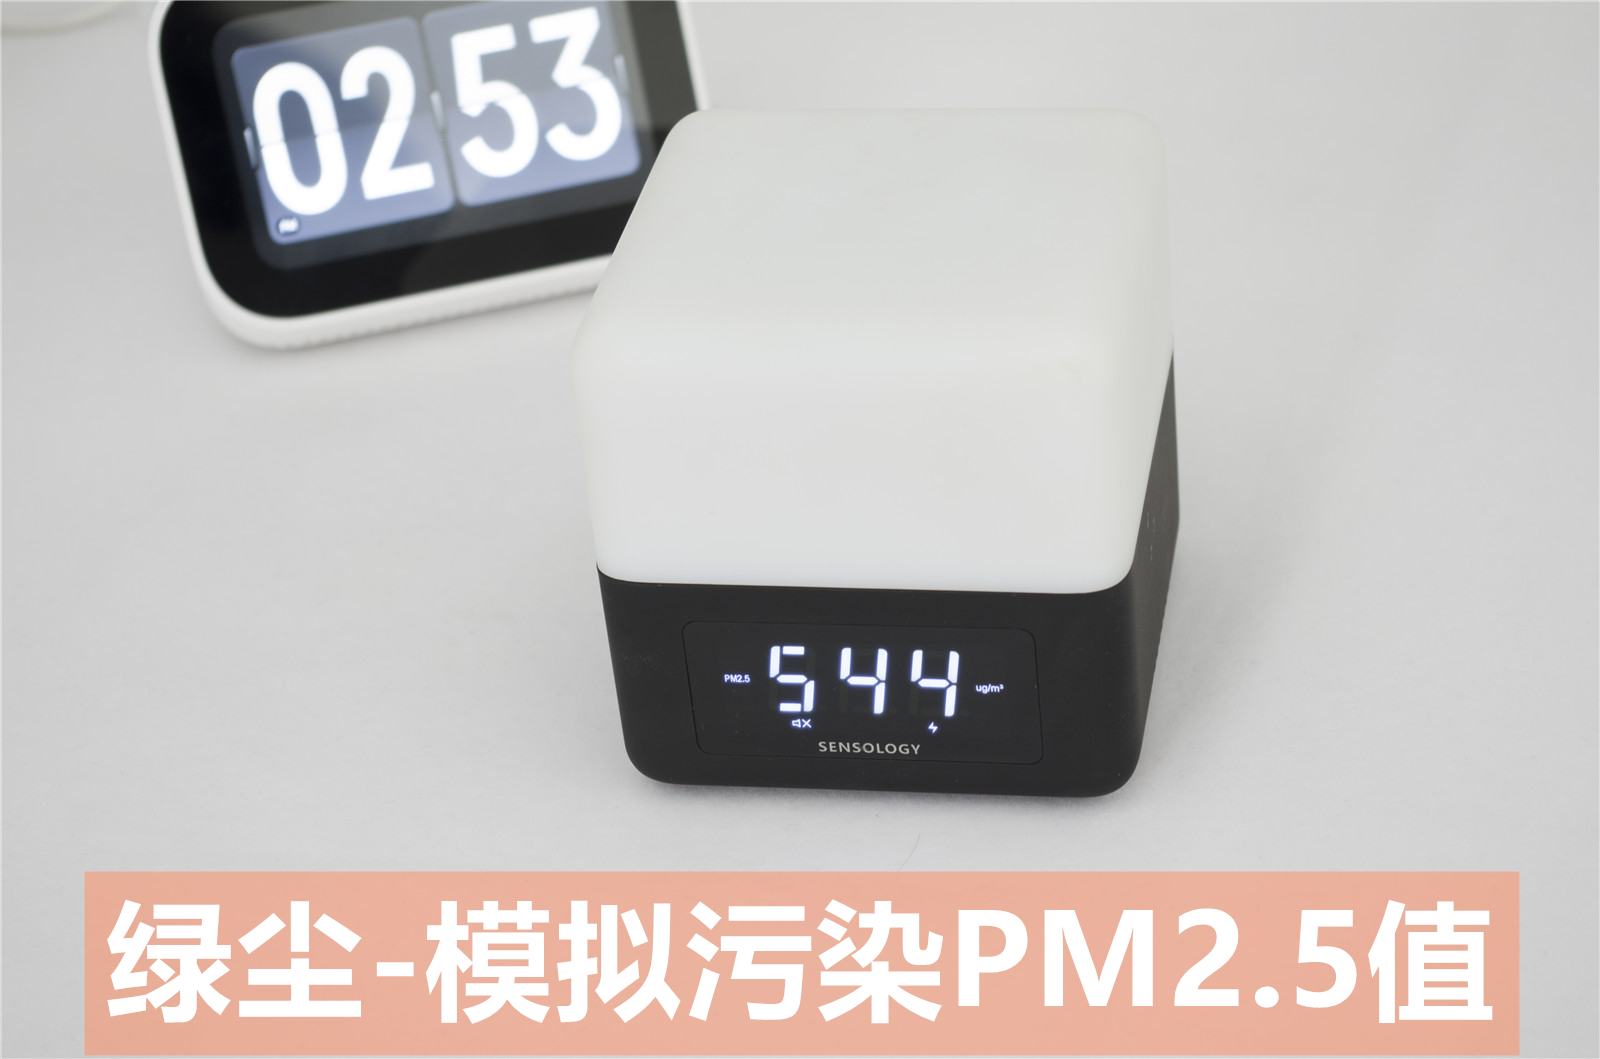 45 yuan-149 yuan we test five Xiaomi air purifier filters: the results are surprising